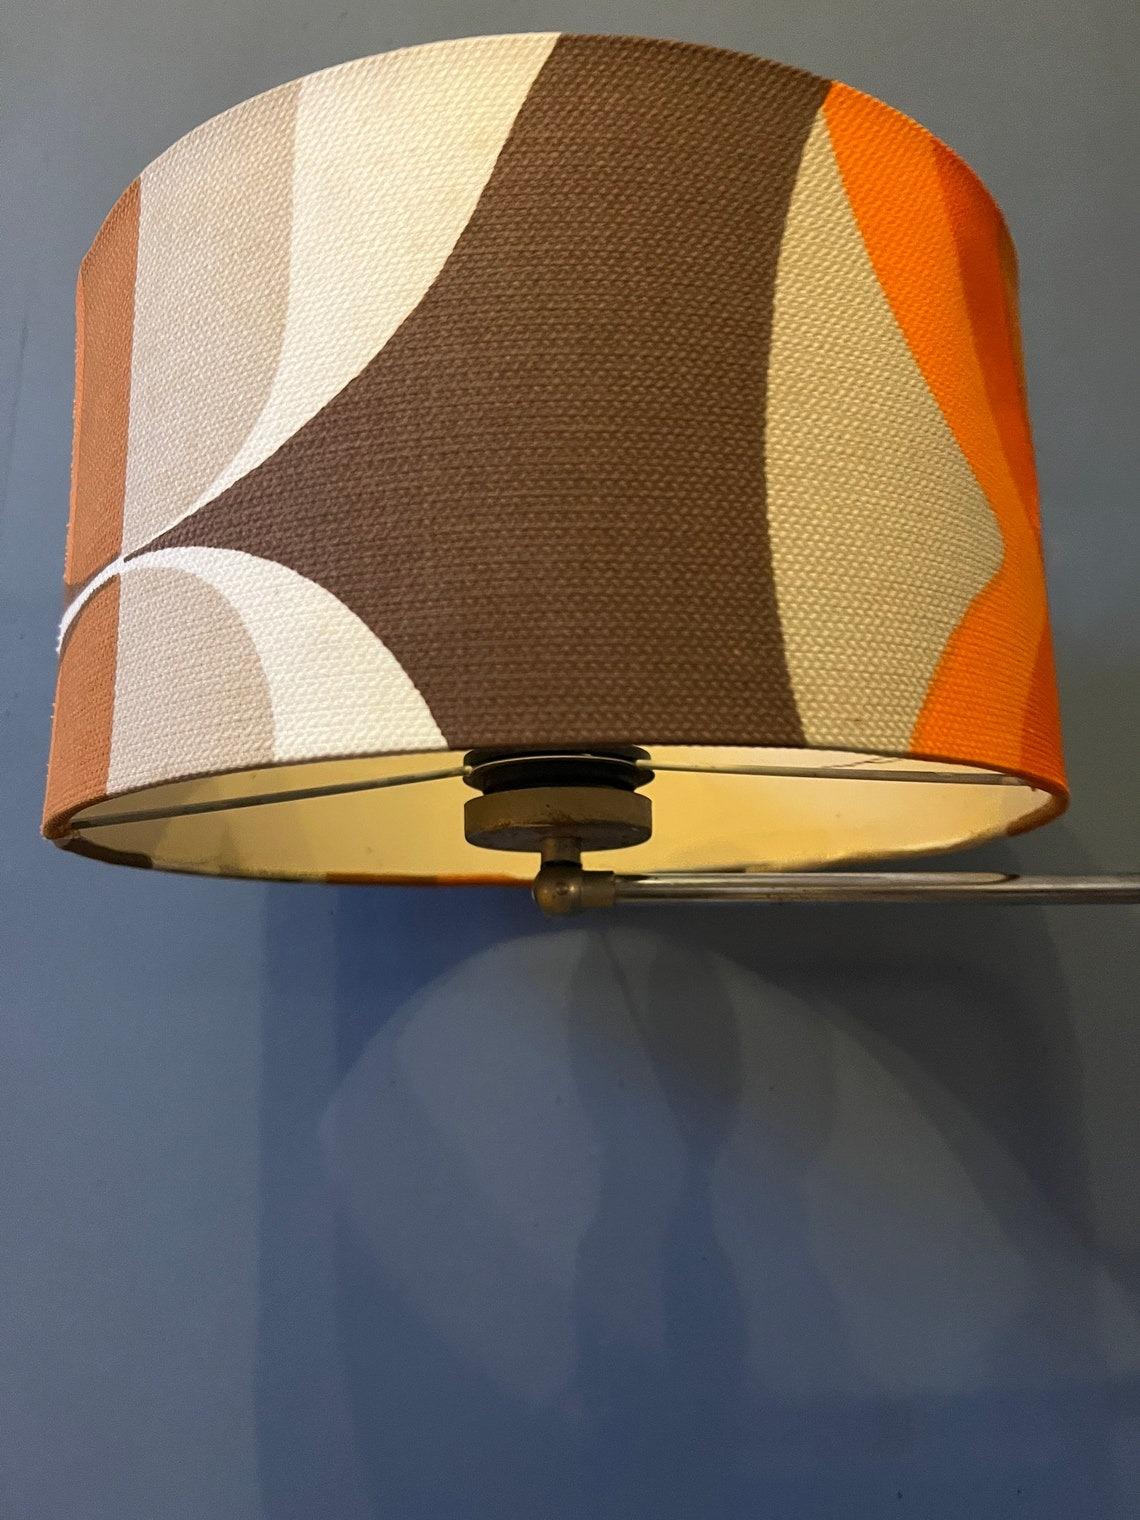 Space Age Swing-Arm Wall Lamp with Orange Flower Shade, 1970s For Sale 3